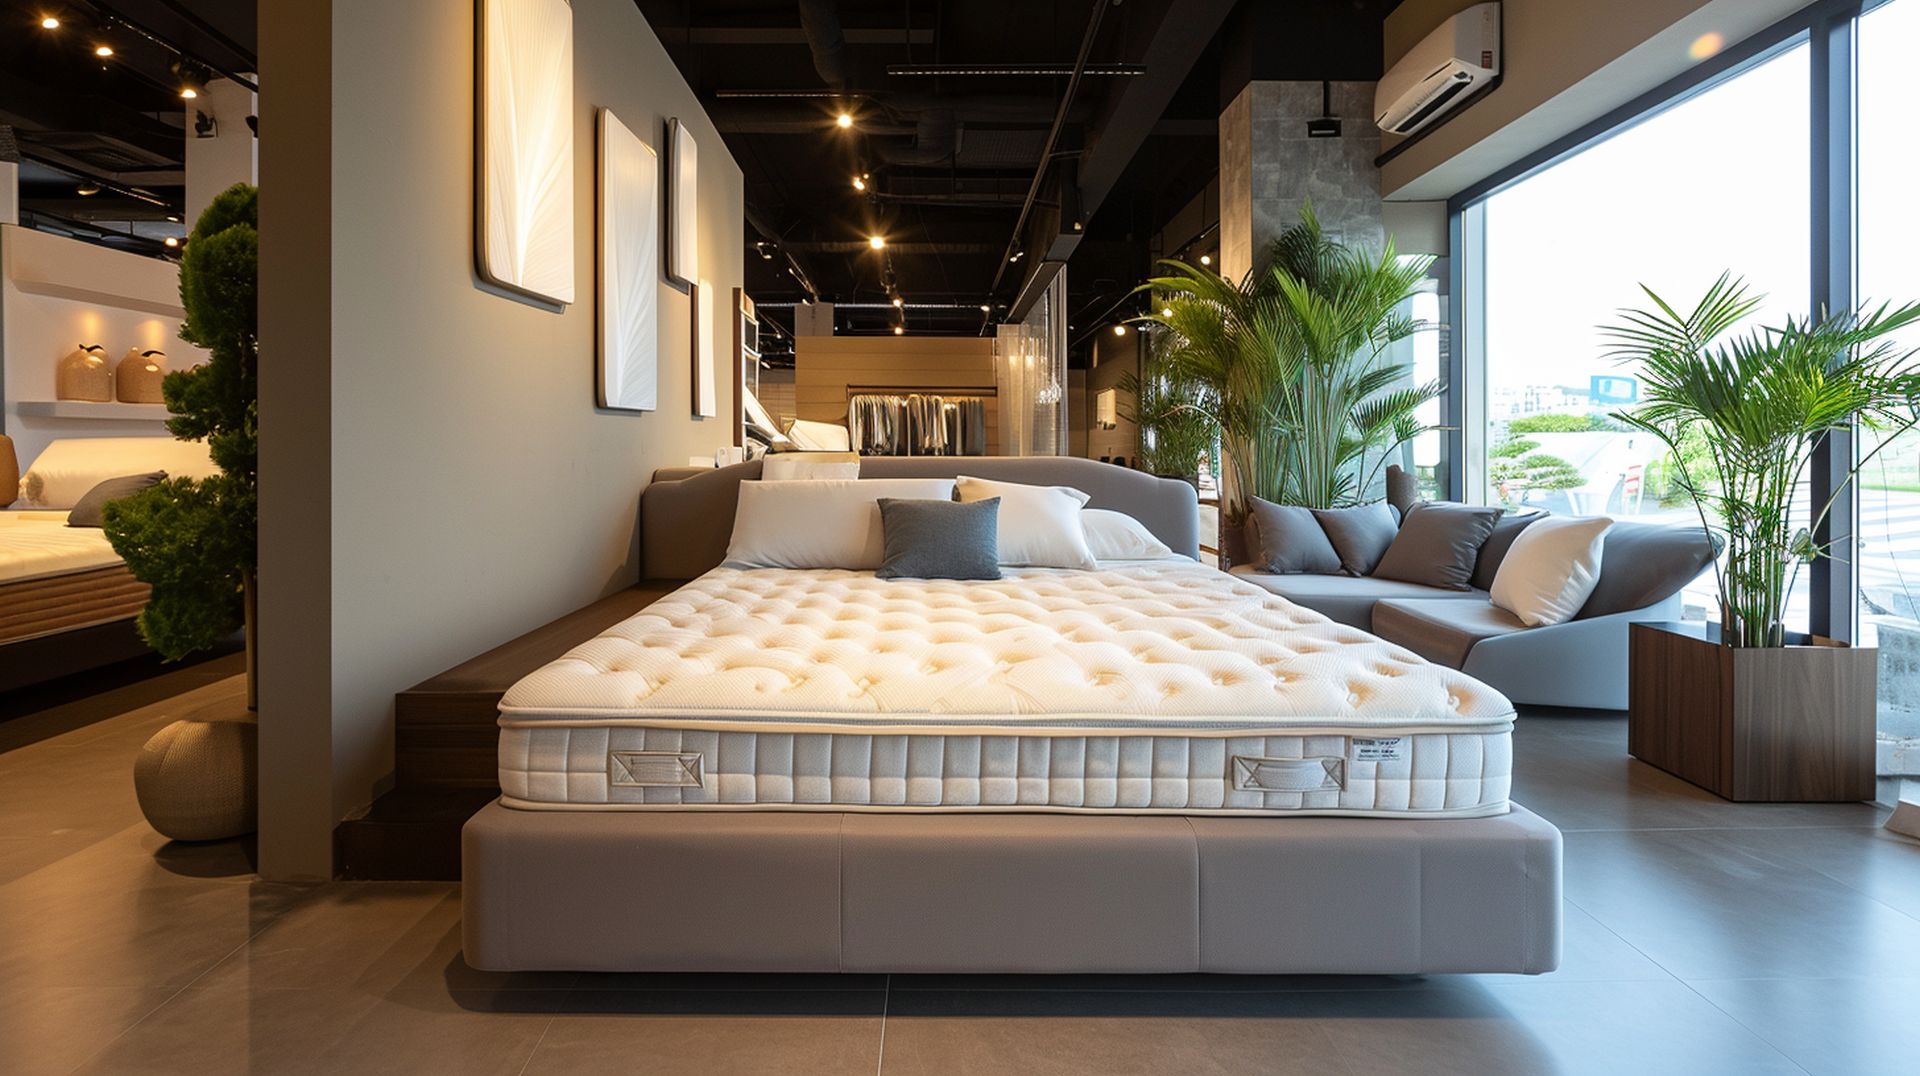 Types of mattresses at mattress dealers in Fort Worth, TX